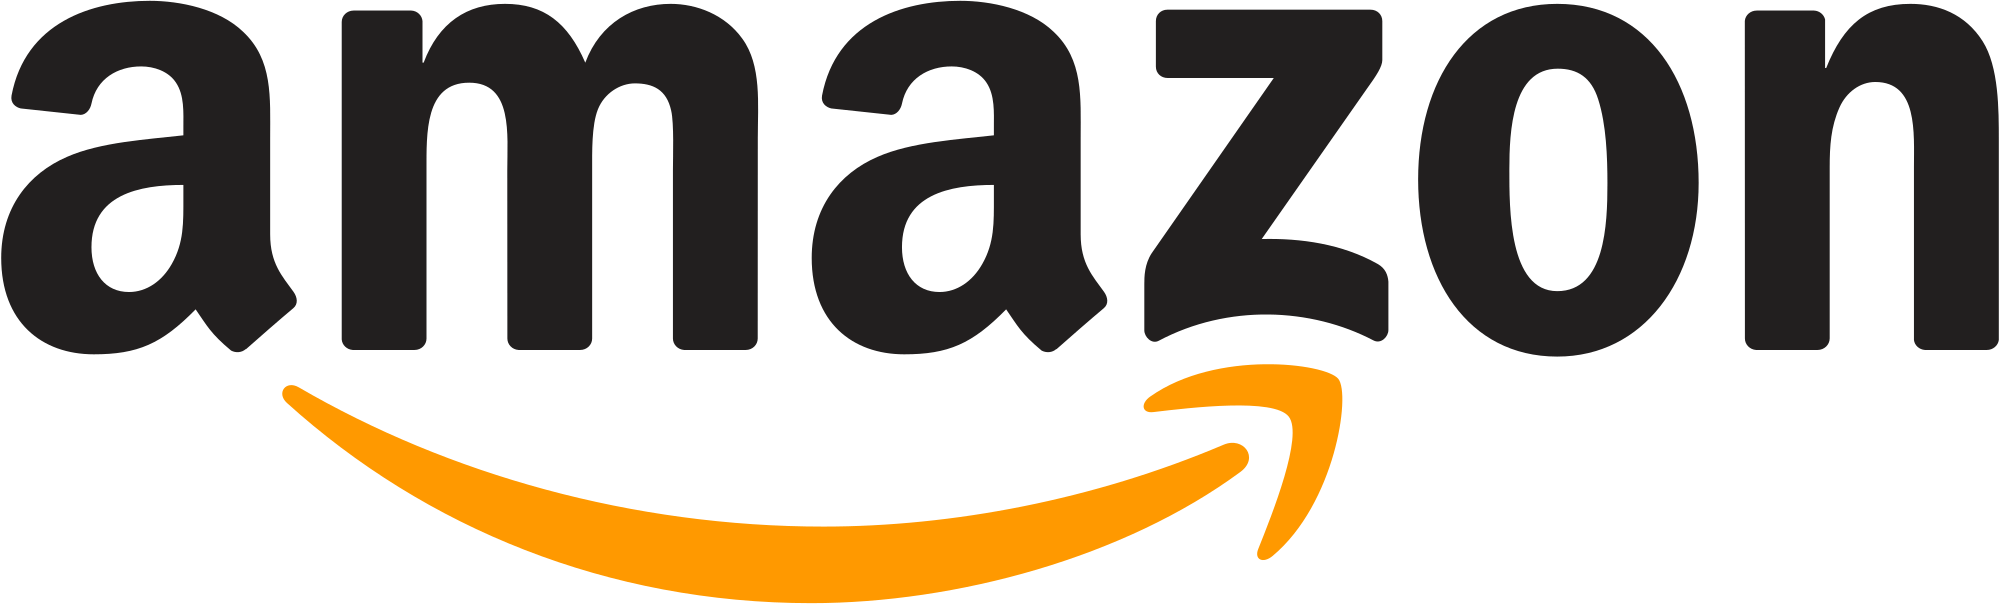 FBA Amazon Logo - How to Find Good Amazon FBA Sourcing Agent in China? - Rohitink.com